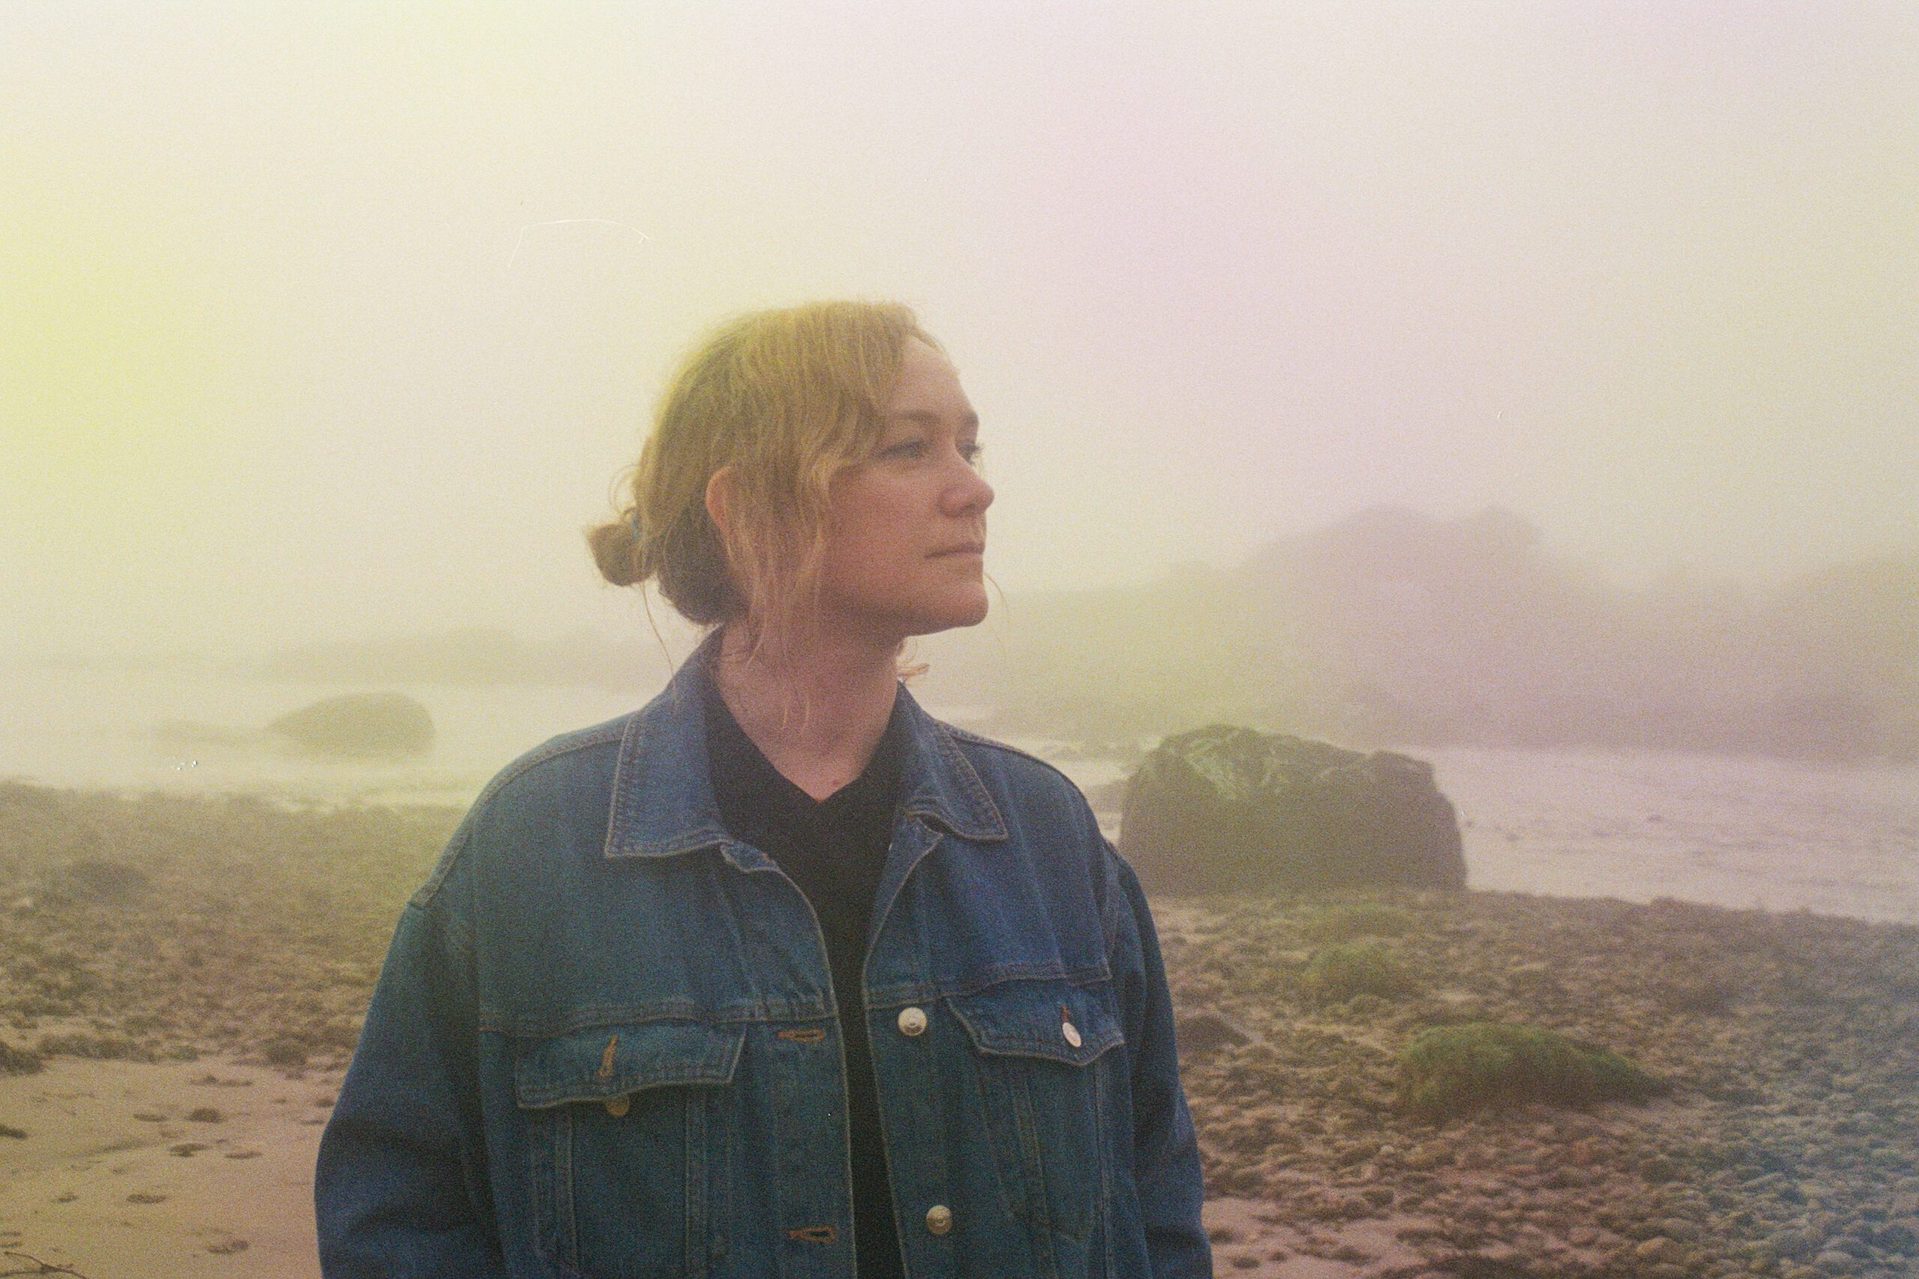 A woman in denim jacket is outdoors, looking away to her left looking reflective, against rocky shoreline blurred by mist.